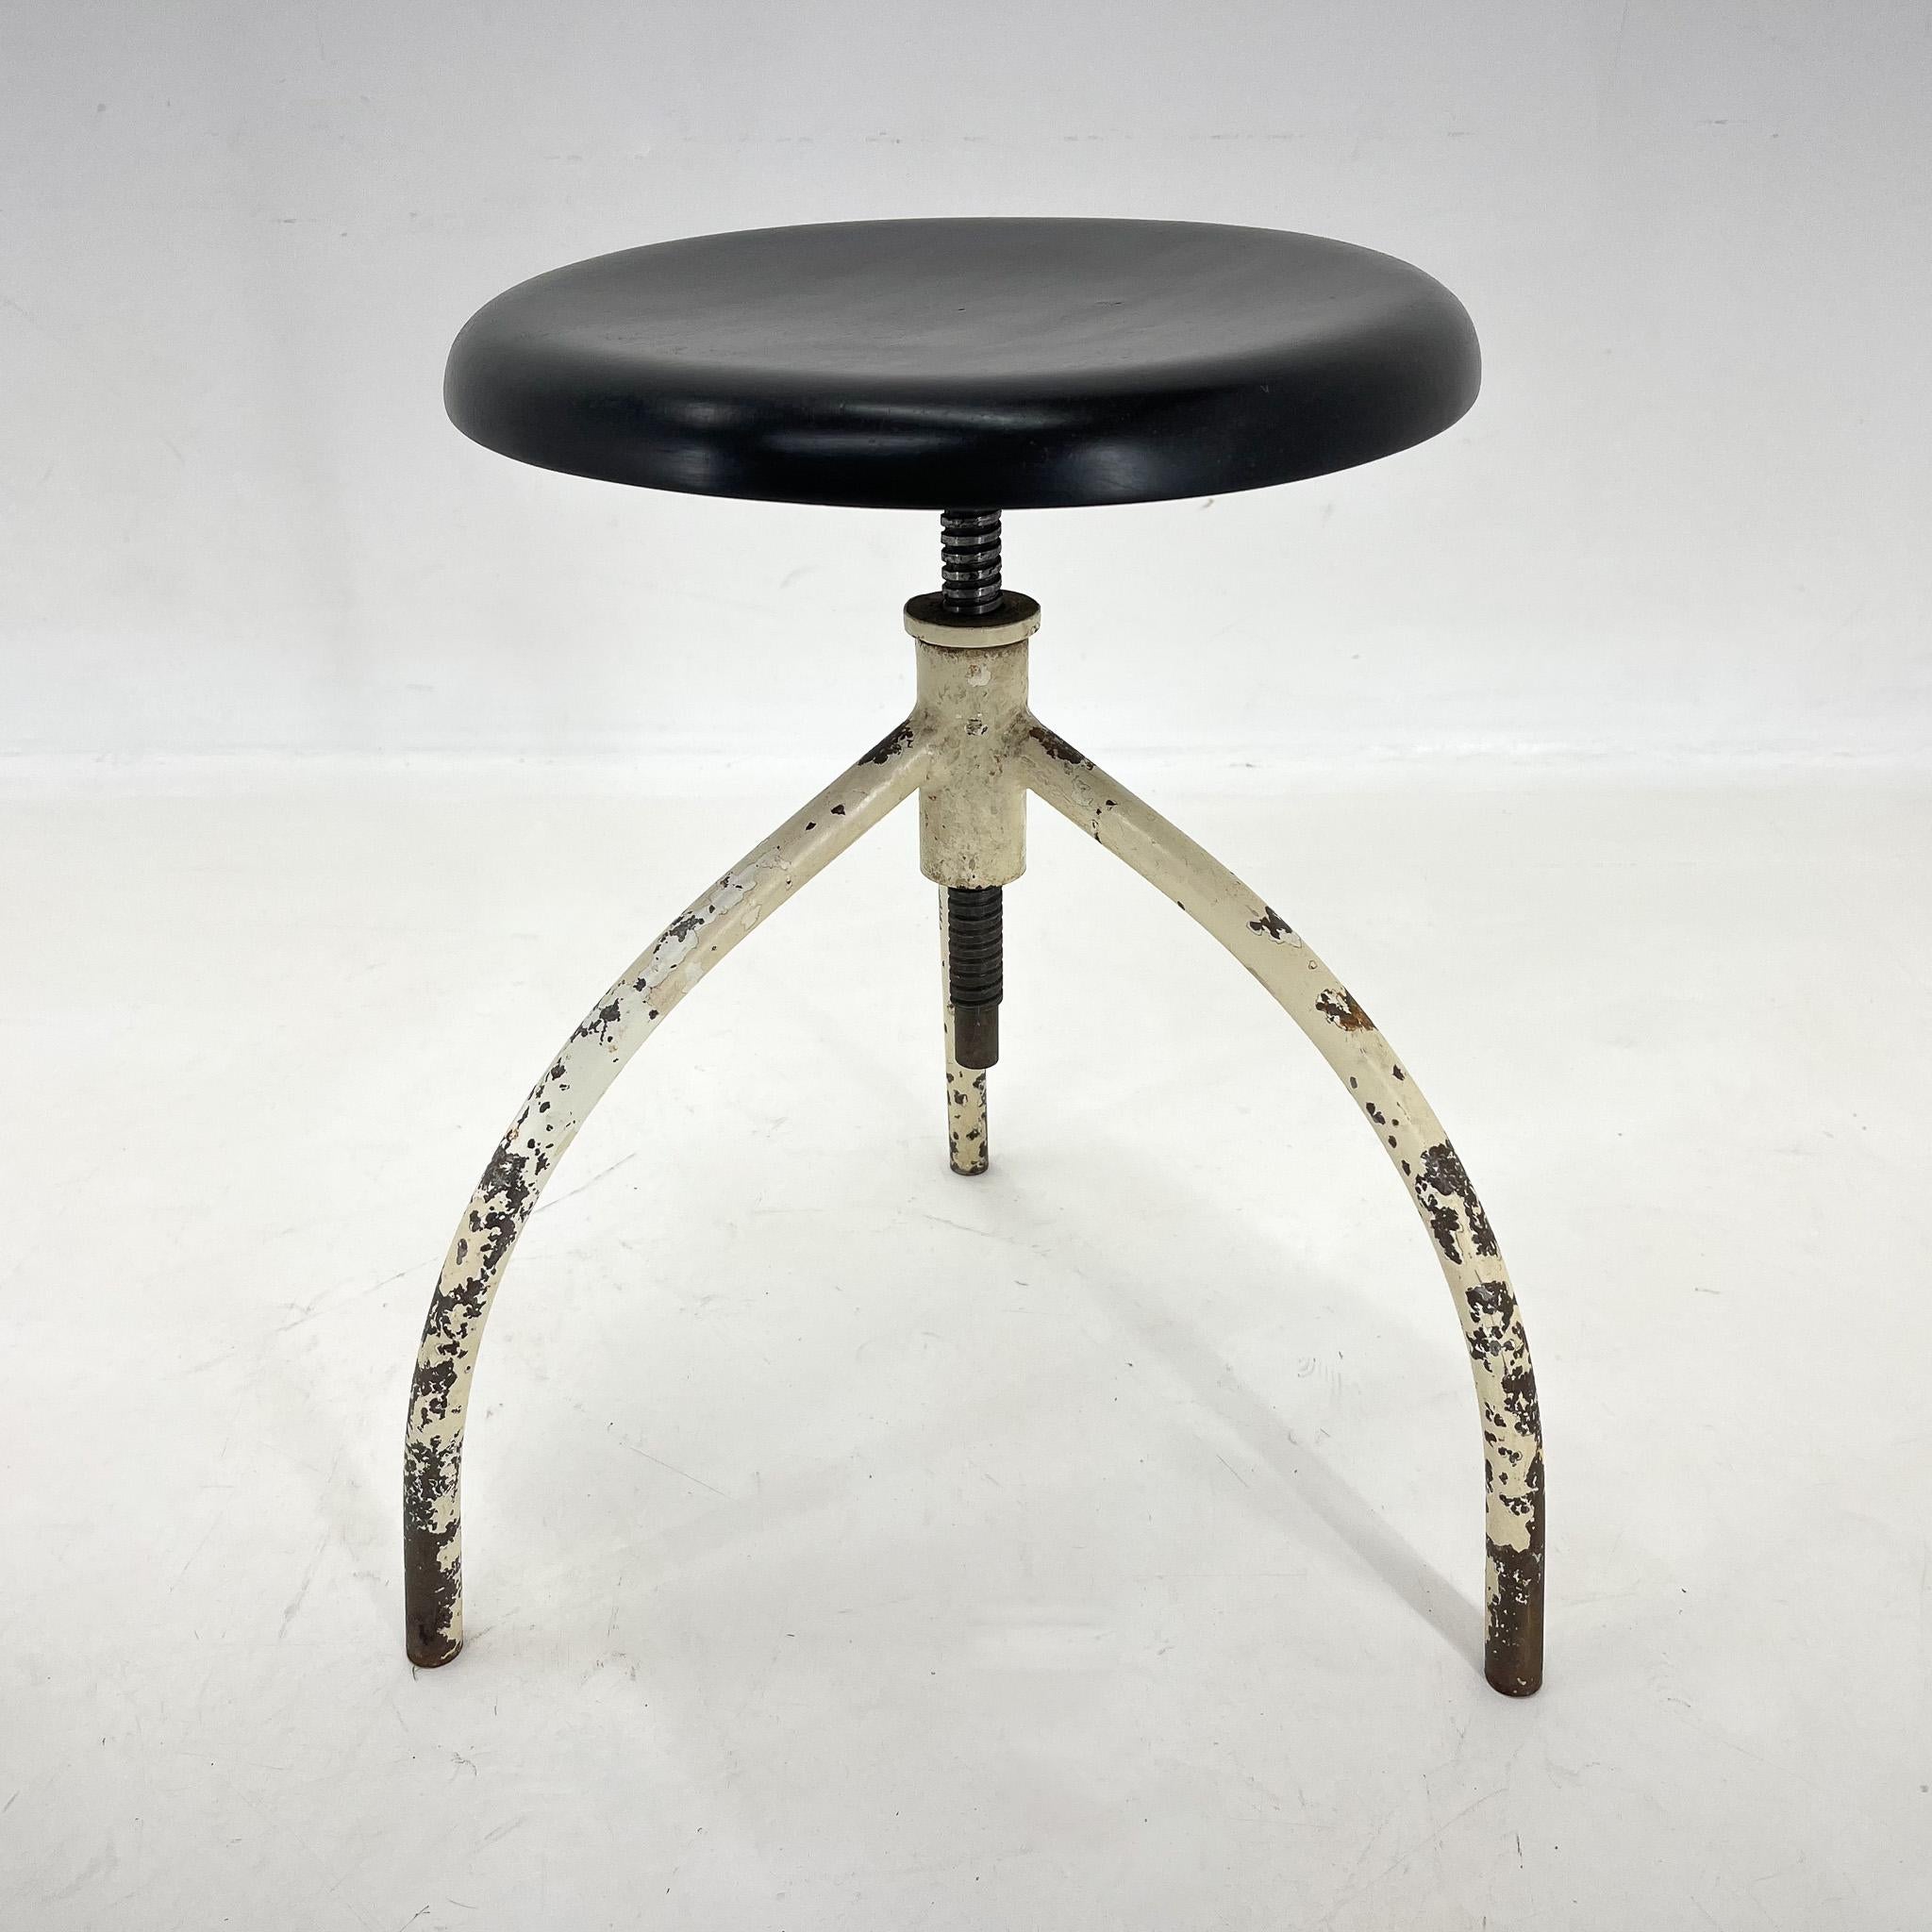 Vintage medical stool made of iron and wood. The hight is adjustable with 57 cm of the maximum hight. The wooden seat was refurbished and it's diametr is 33 cm.